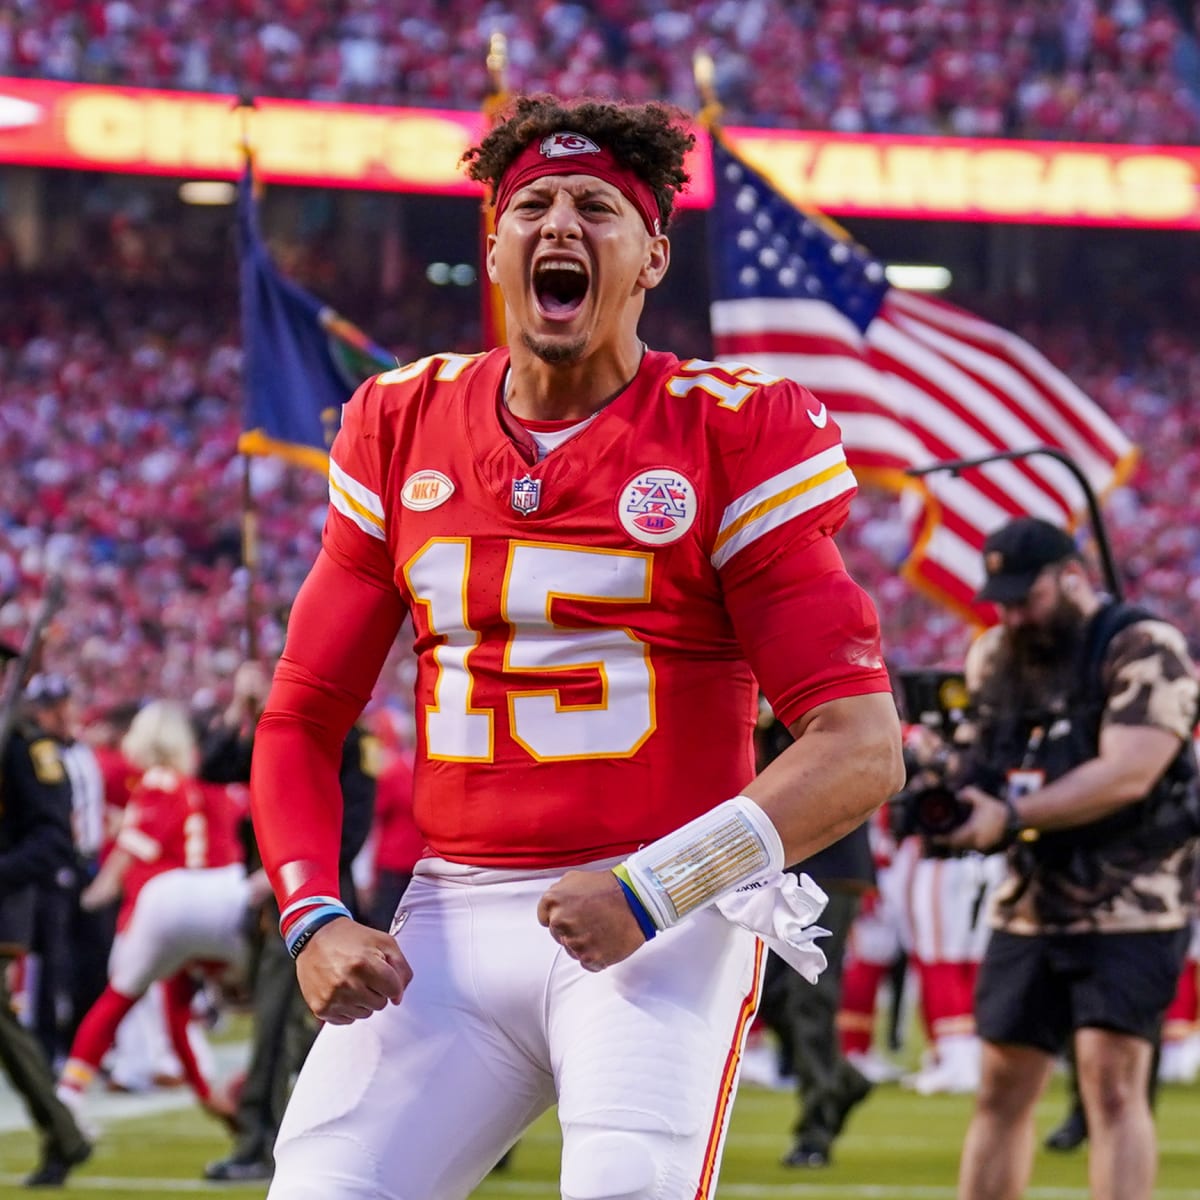 Always Making Me Feel Special' - What Did Patrick Mahomes Do for